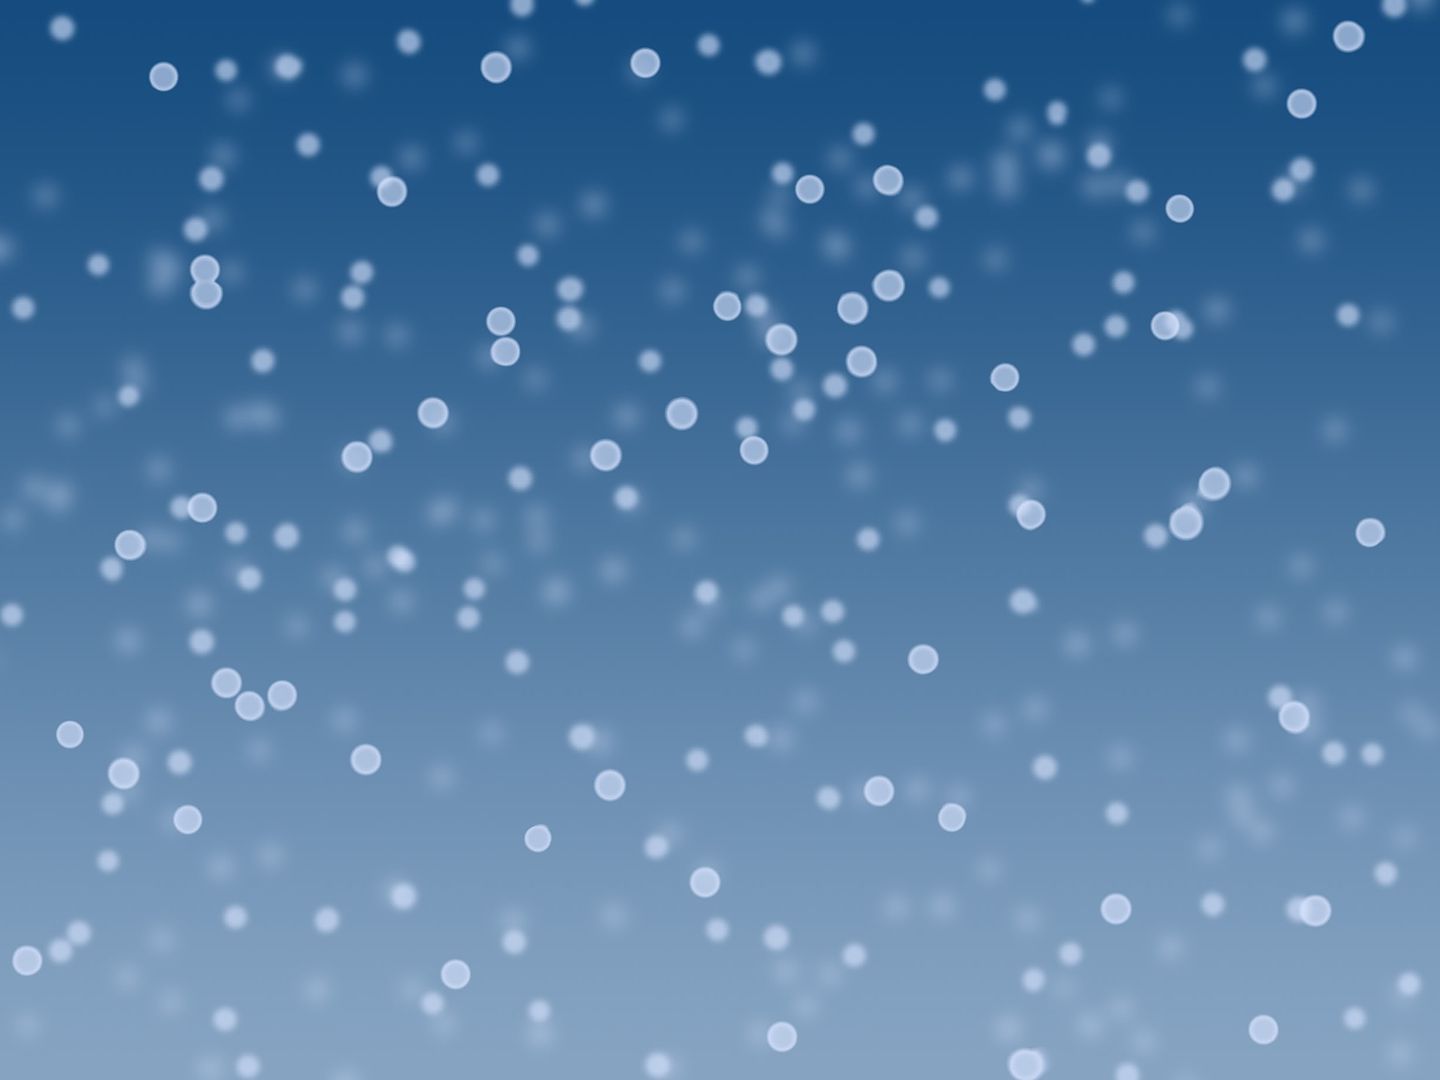 Download the SNOW Falling wallpaper